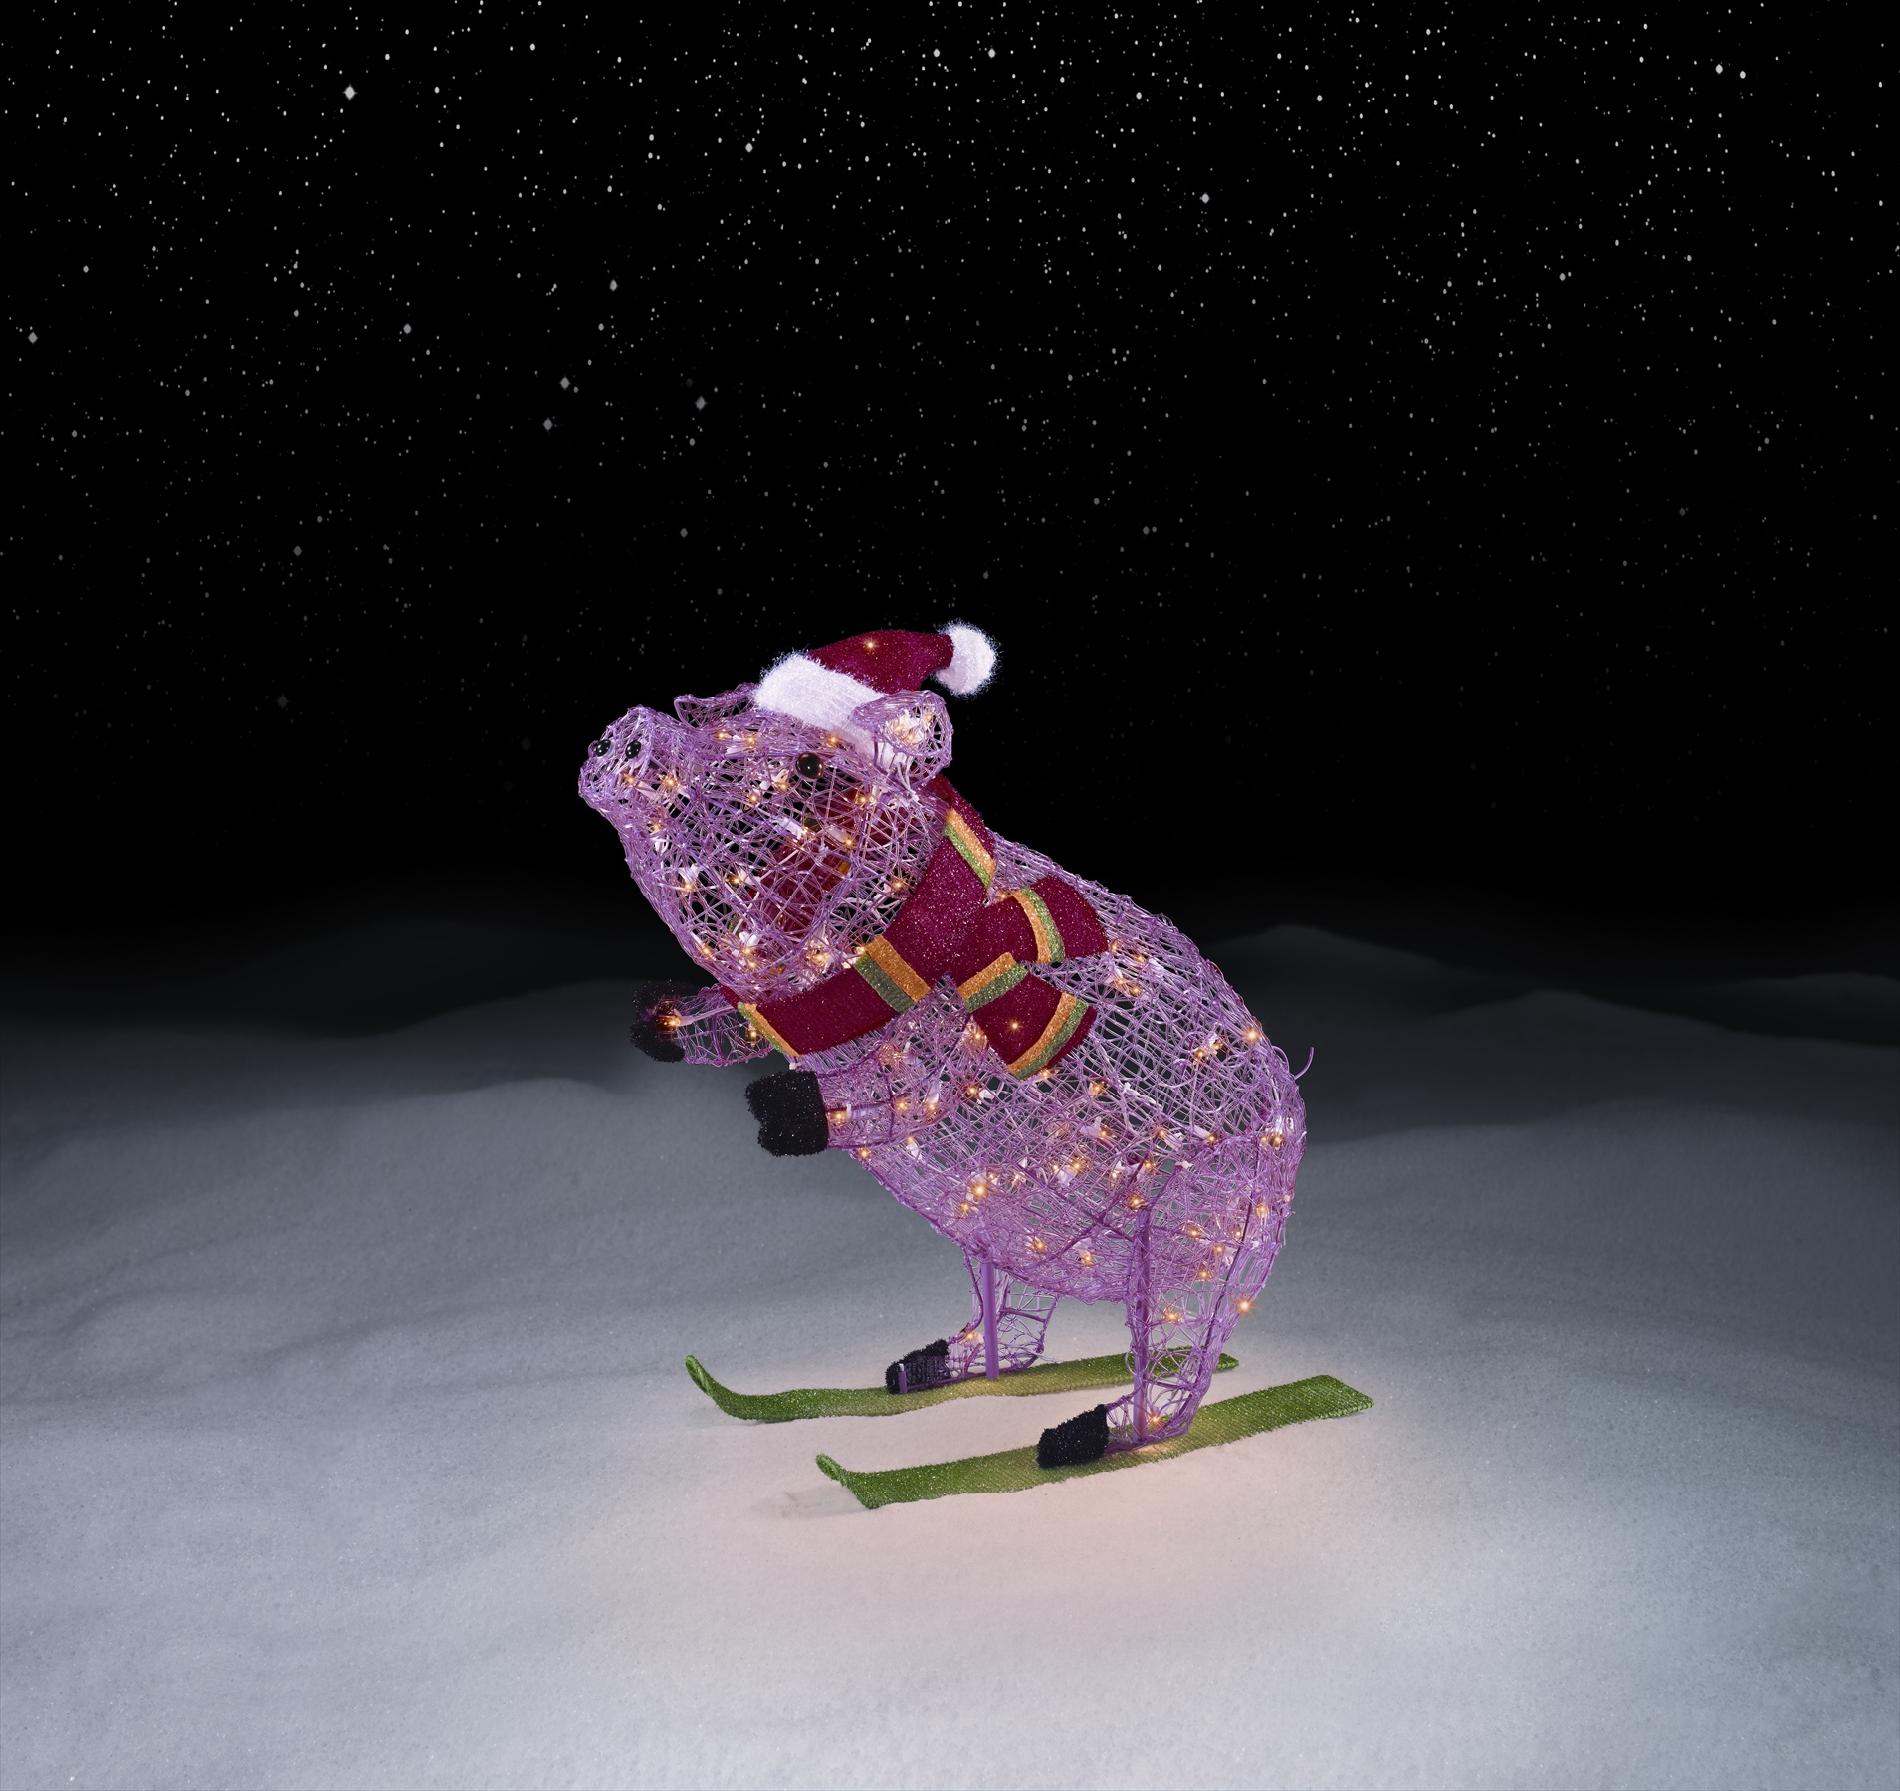 Trimming Traditions 30" 100 Light Skiing Pig Christmas Decoration